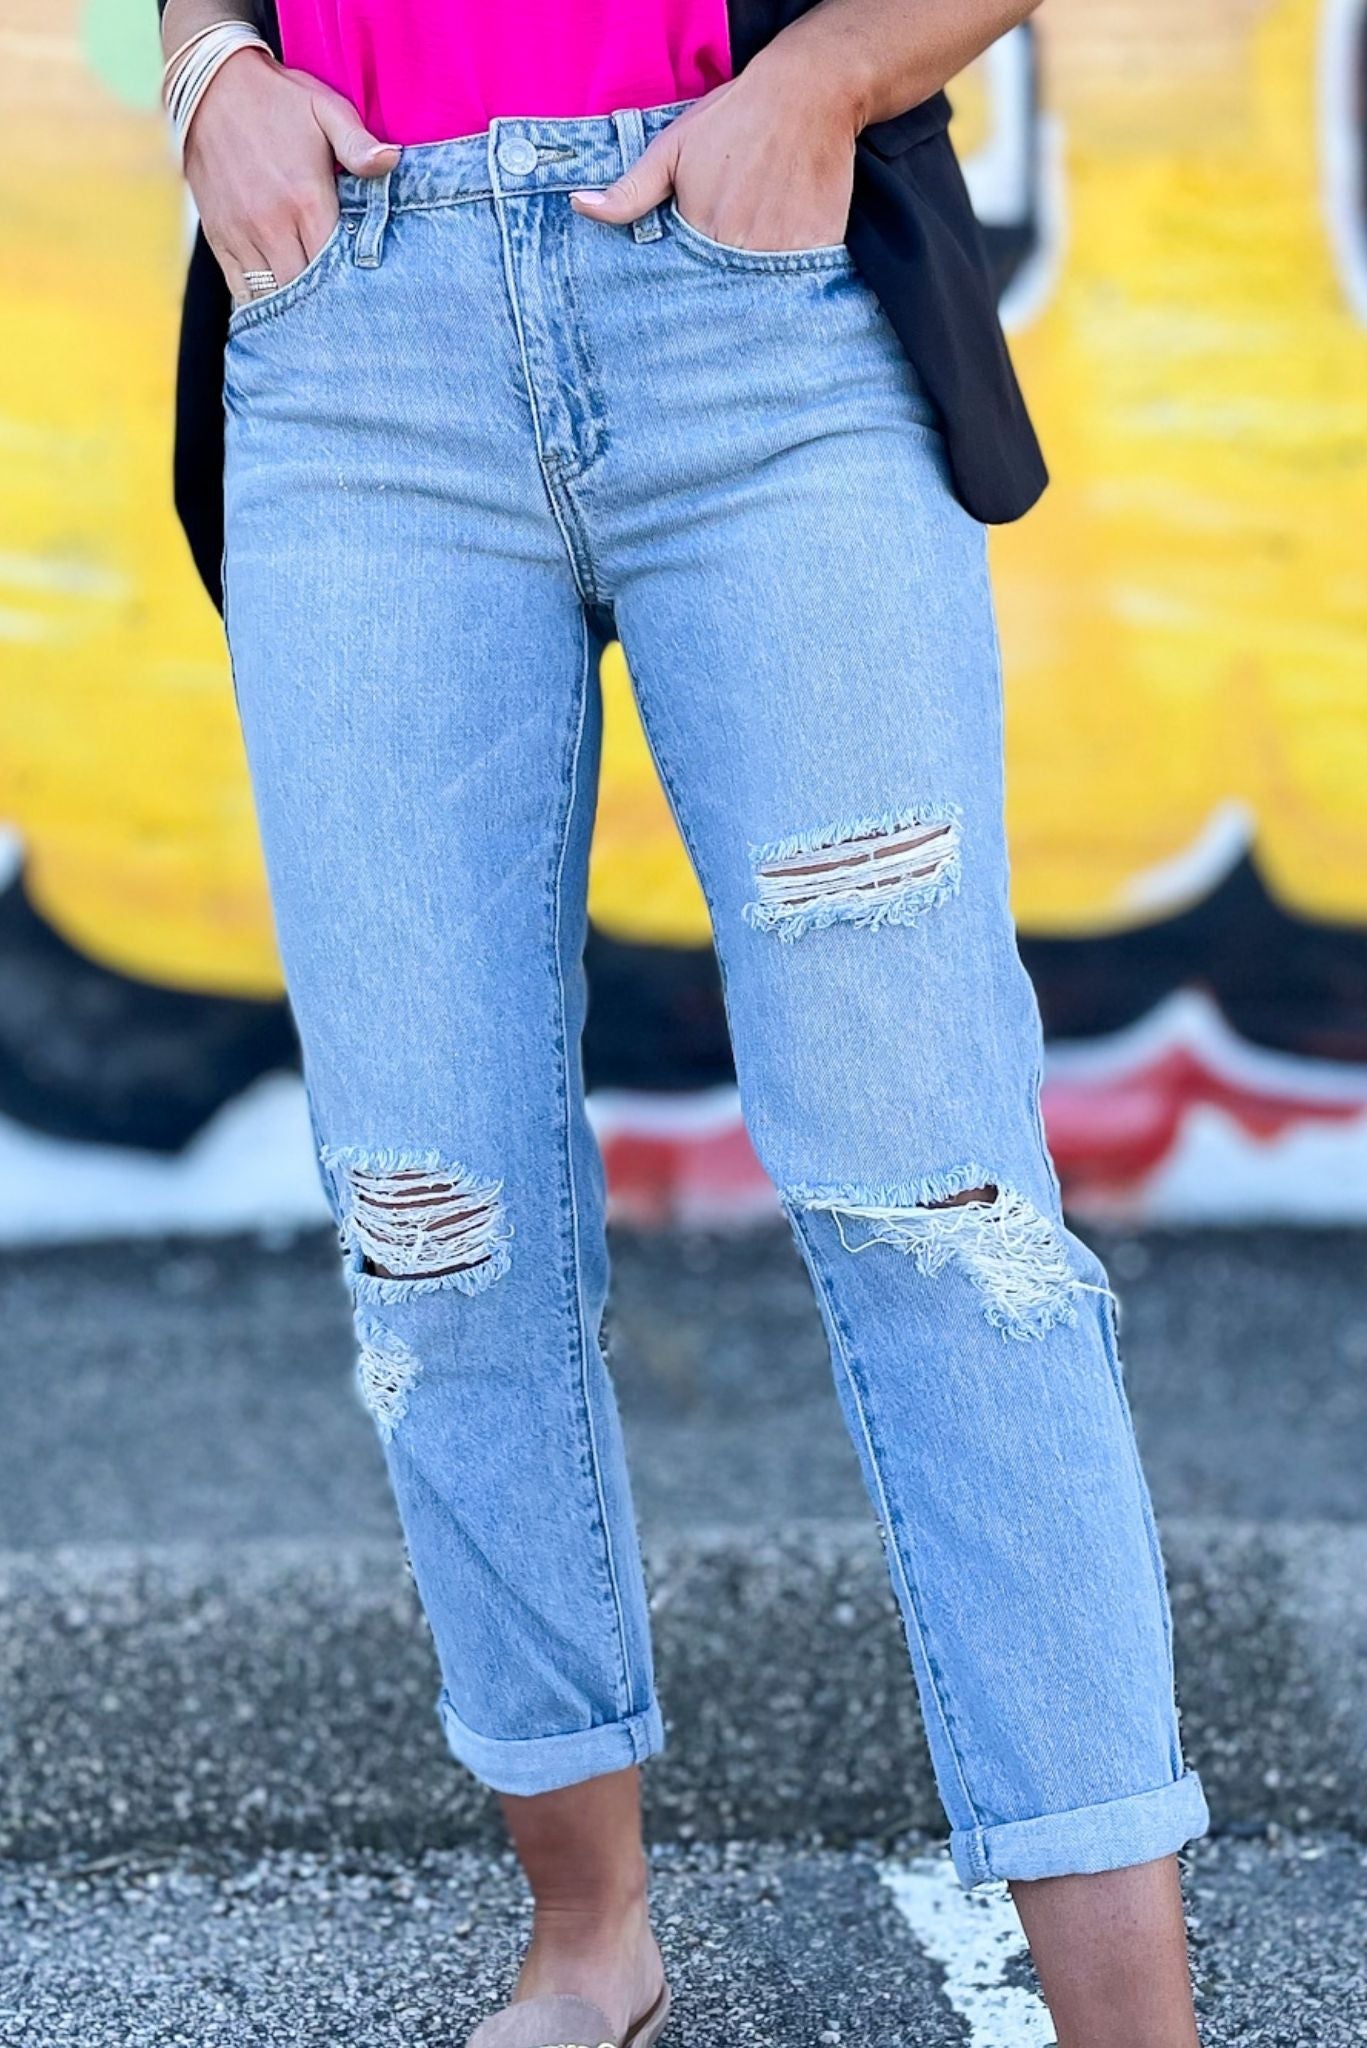 Load image into Gallery viewer, light wash high rise distressed cuffed boyfriend jeans, boyfriend jeans, distressed, denim, cropped, cuffed jeans, mom style, chic, light wash, spring style, shop style your senses by mallory fitzsimmons
